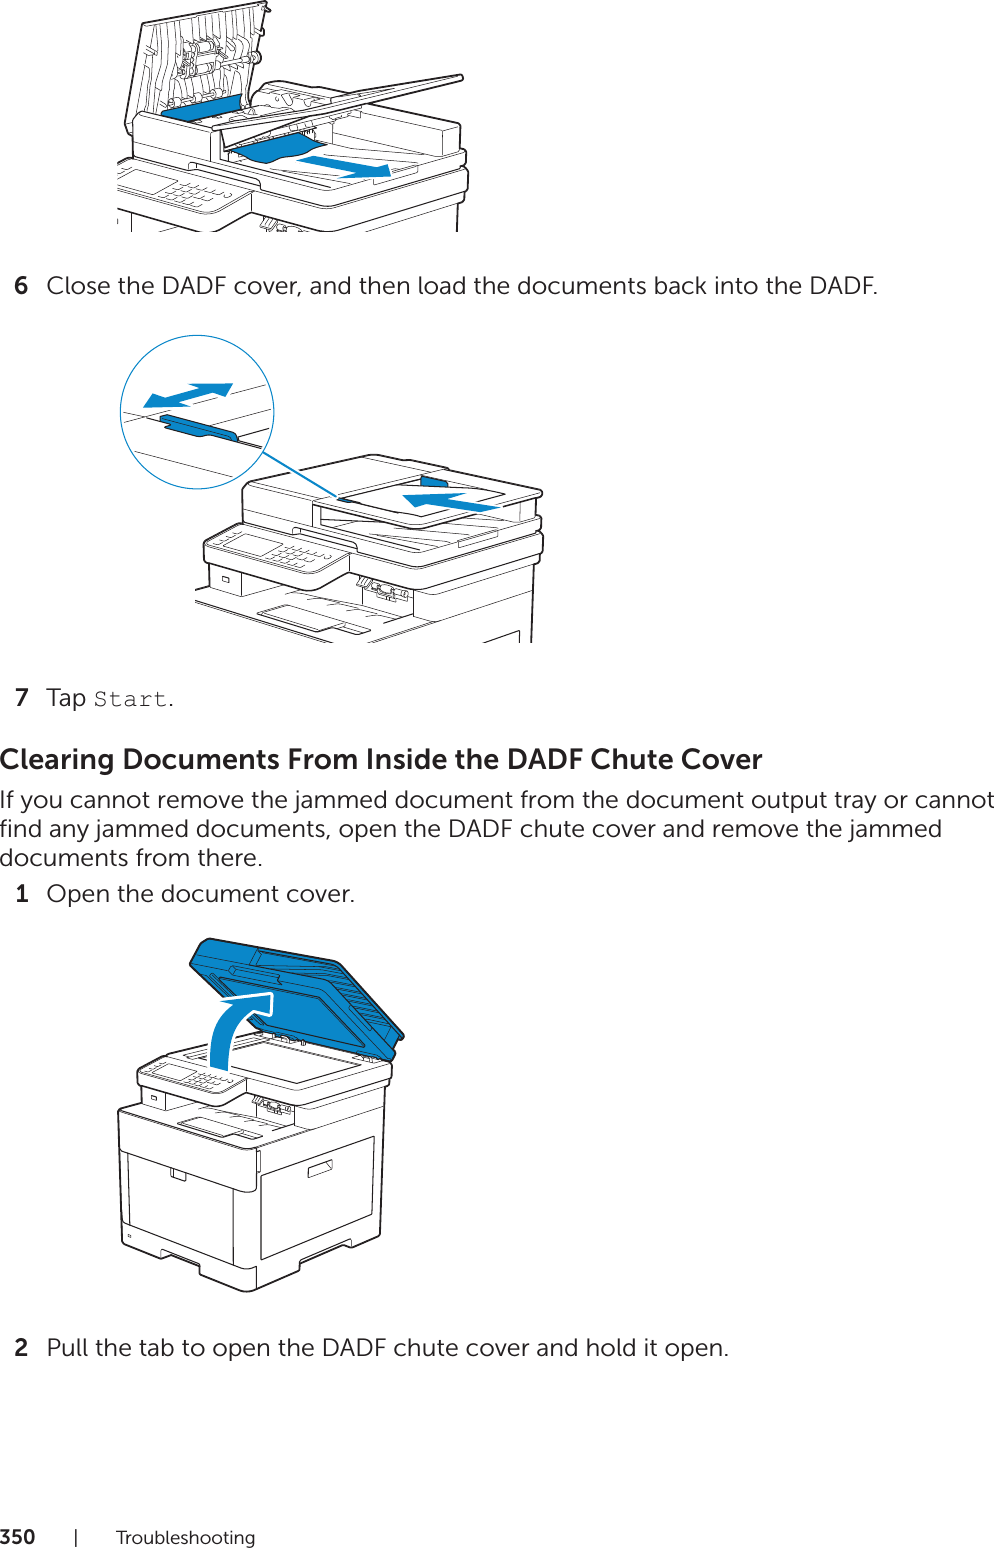 350|Troubleshooting6Close the DADF cover, and then load the documents back into the DADF.7Tap Start.Clearing Documents From Inside the DADF Chute CoverIf you cannot remove the jammed document from the document output tray or cannot find any jammed documents, open the DADF chute cover and remove the jammed documents from there.1Open the document cover.2Pull the tab to open the DADF chute cover and hold it open.